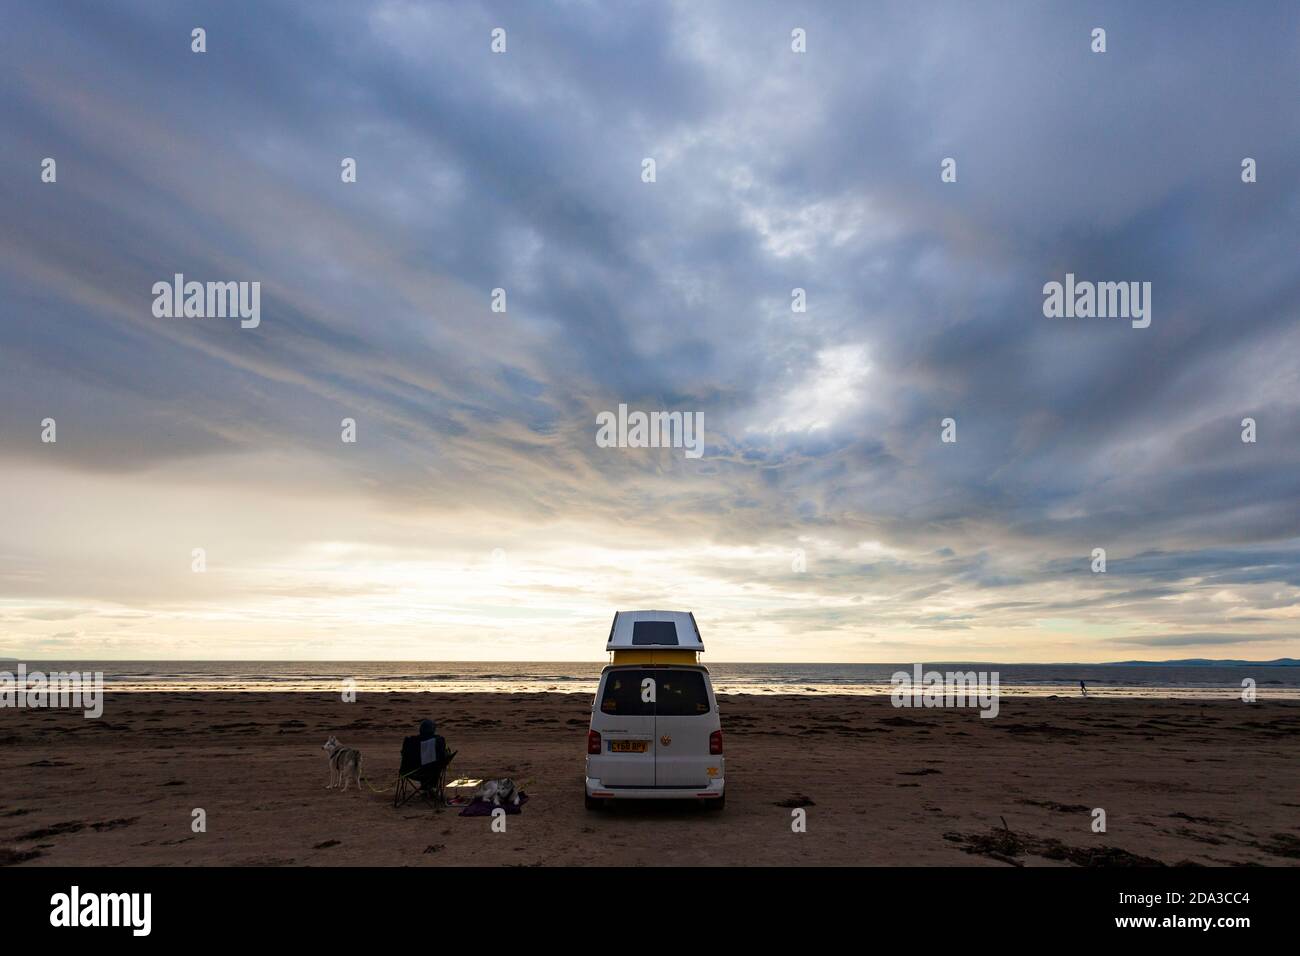 Morfa Bychan, North Wales, UK 9th November 2018, UK Weather: Warm temperatures on the North Wales coast as some head to the coast for the first day out of the Welsh lockdown or firebreak. A view of a VW Campervan towards to the sea at Morfa Bychan on the first day out of lockdown for this beach goer in North Wales  © DGDImages/Alamy Live News Stock Photo